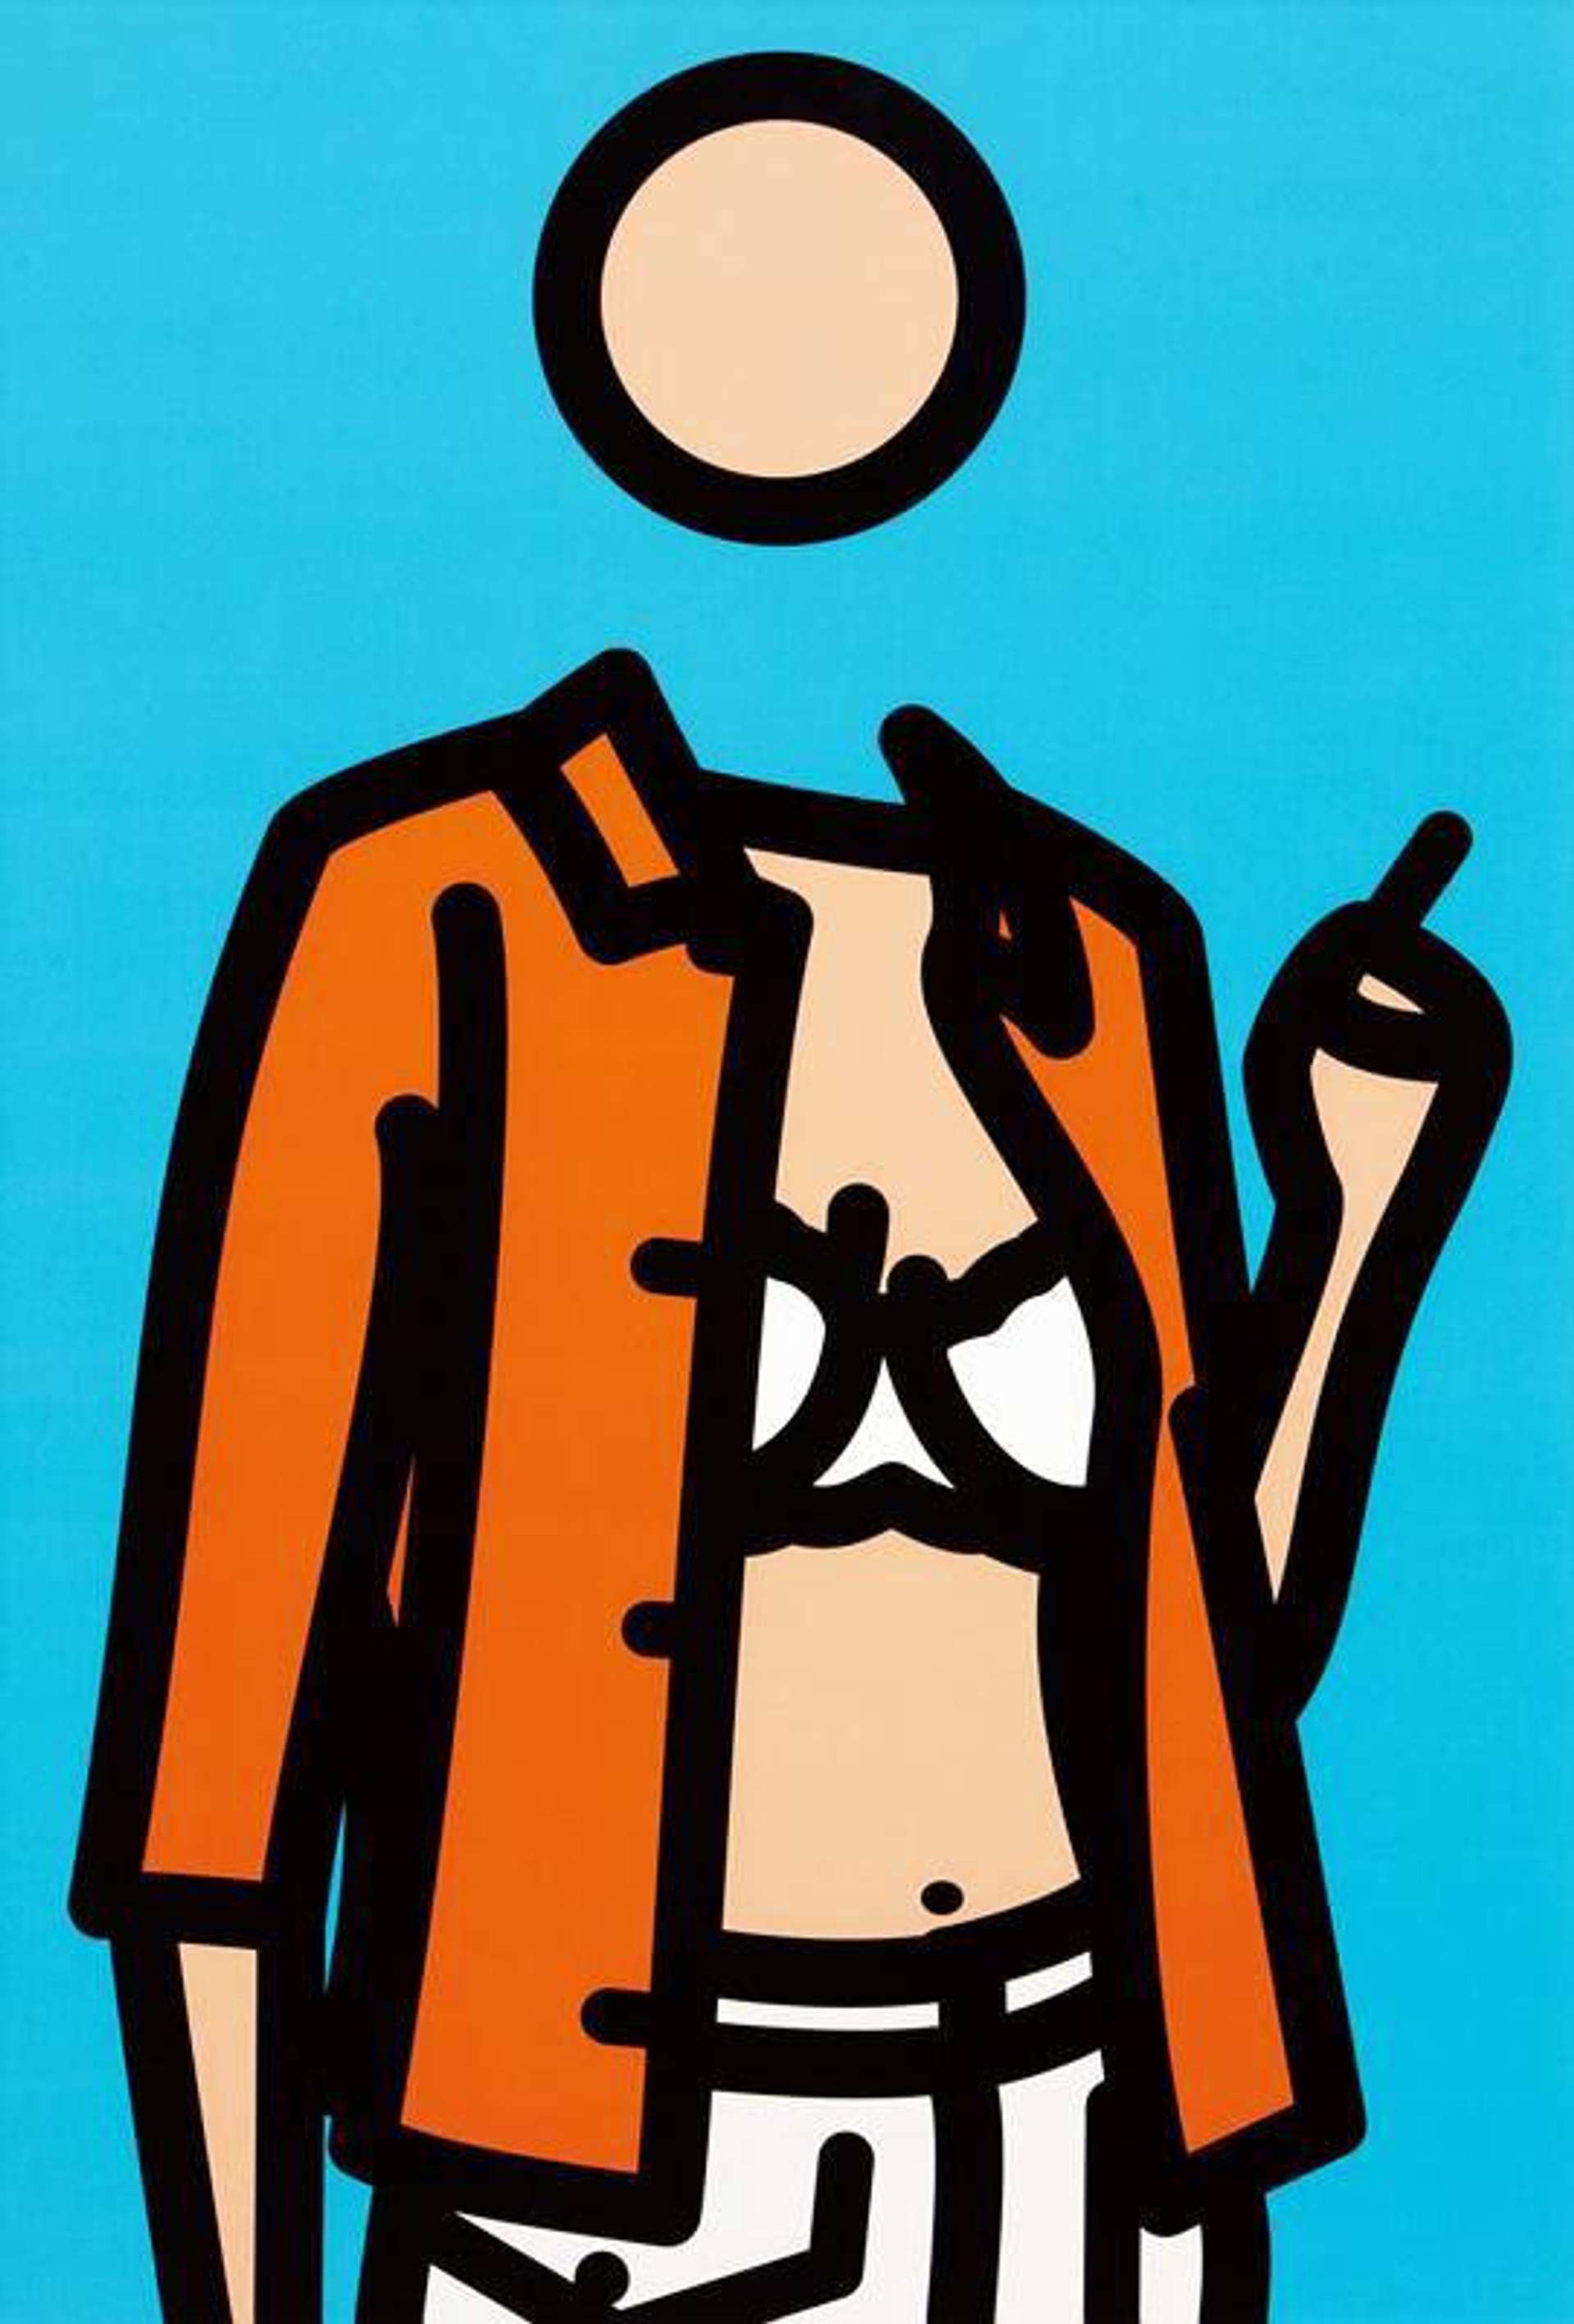 Julian Opie: Ruth With Cigarette 1 - Signed Print